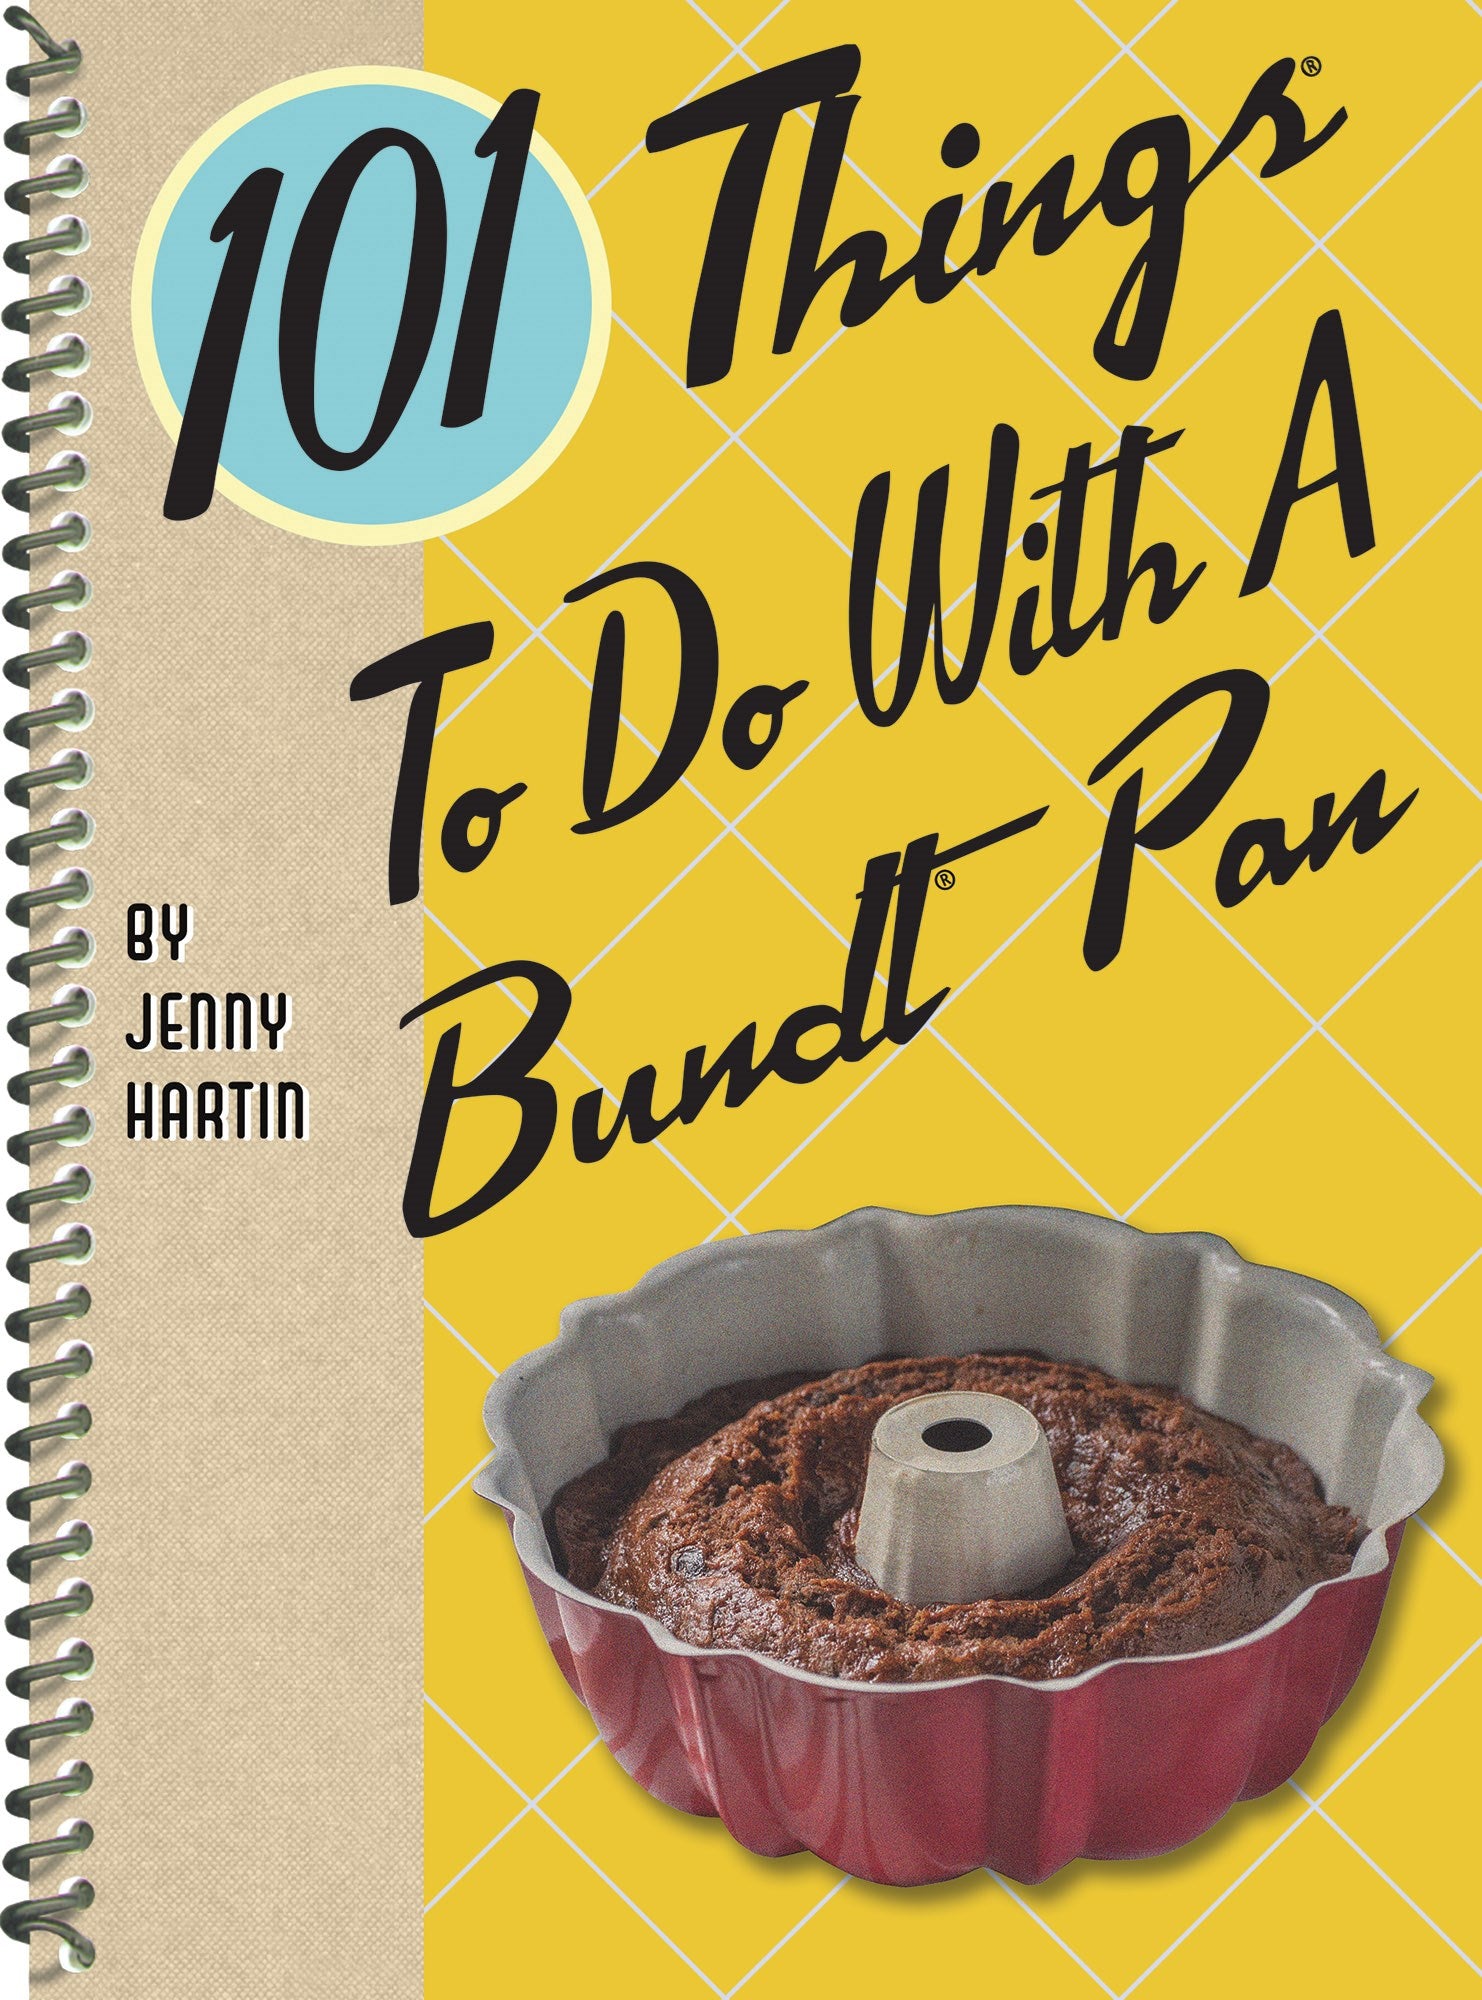 101 Things to Do With a Bundt® Pan